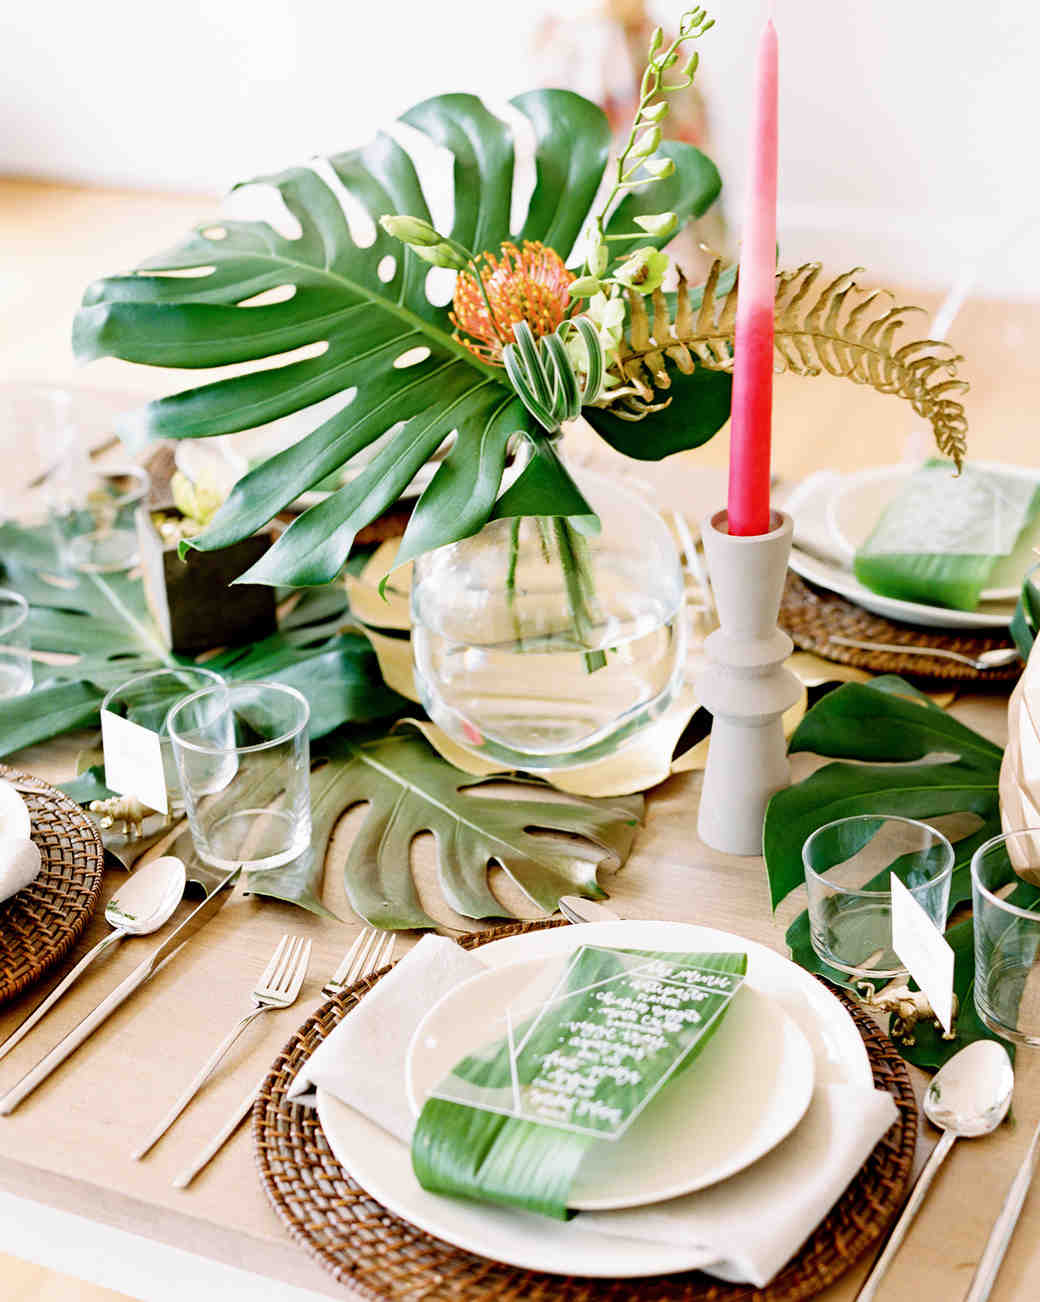 25-bridal-shower-centerpieces-the-bride-to-be-will-love-martha